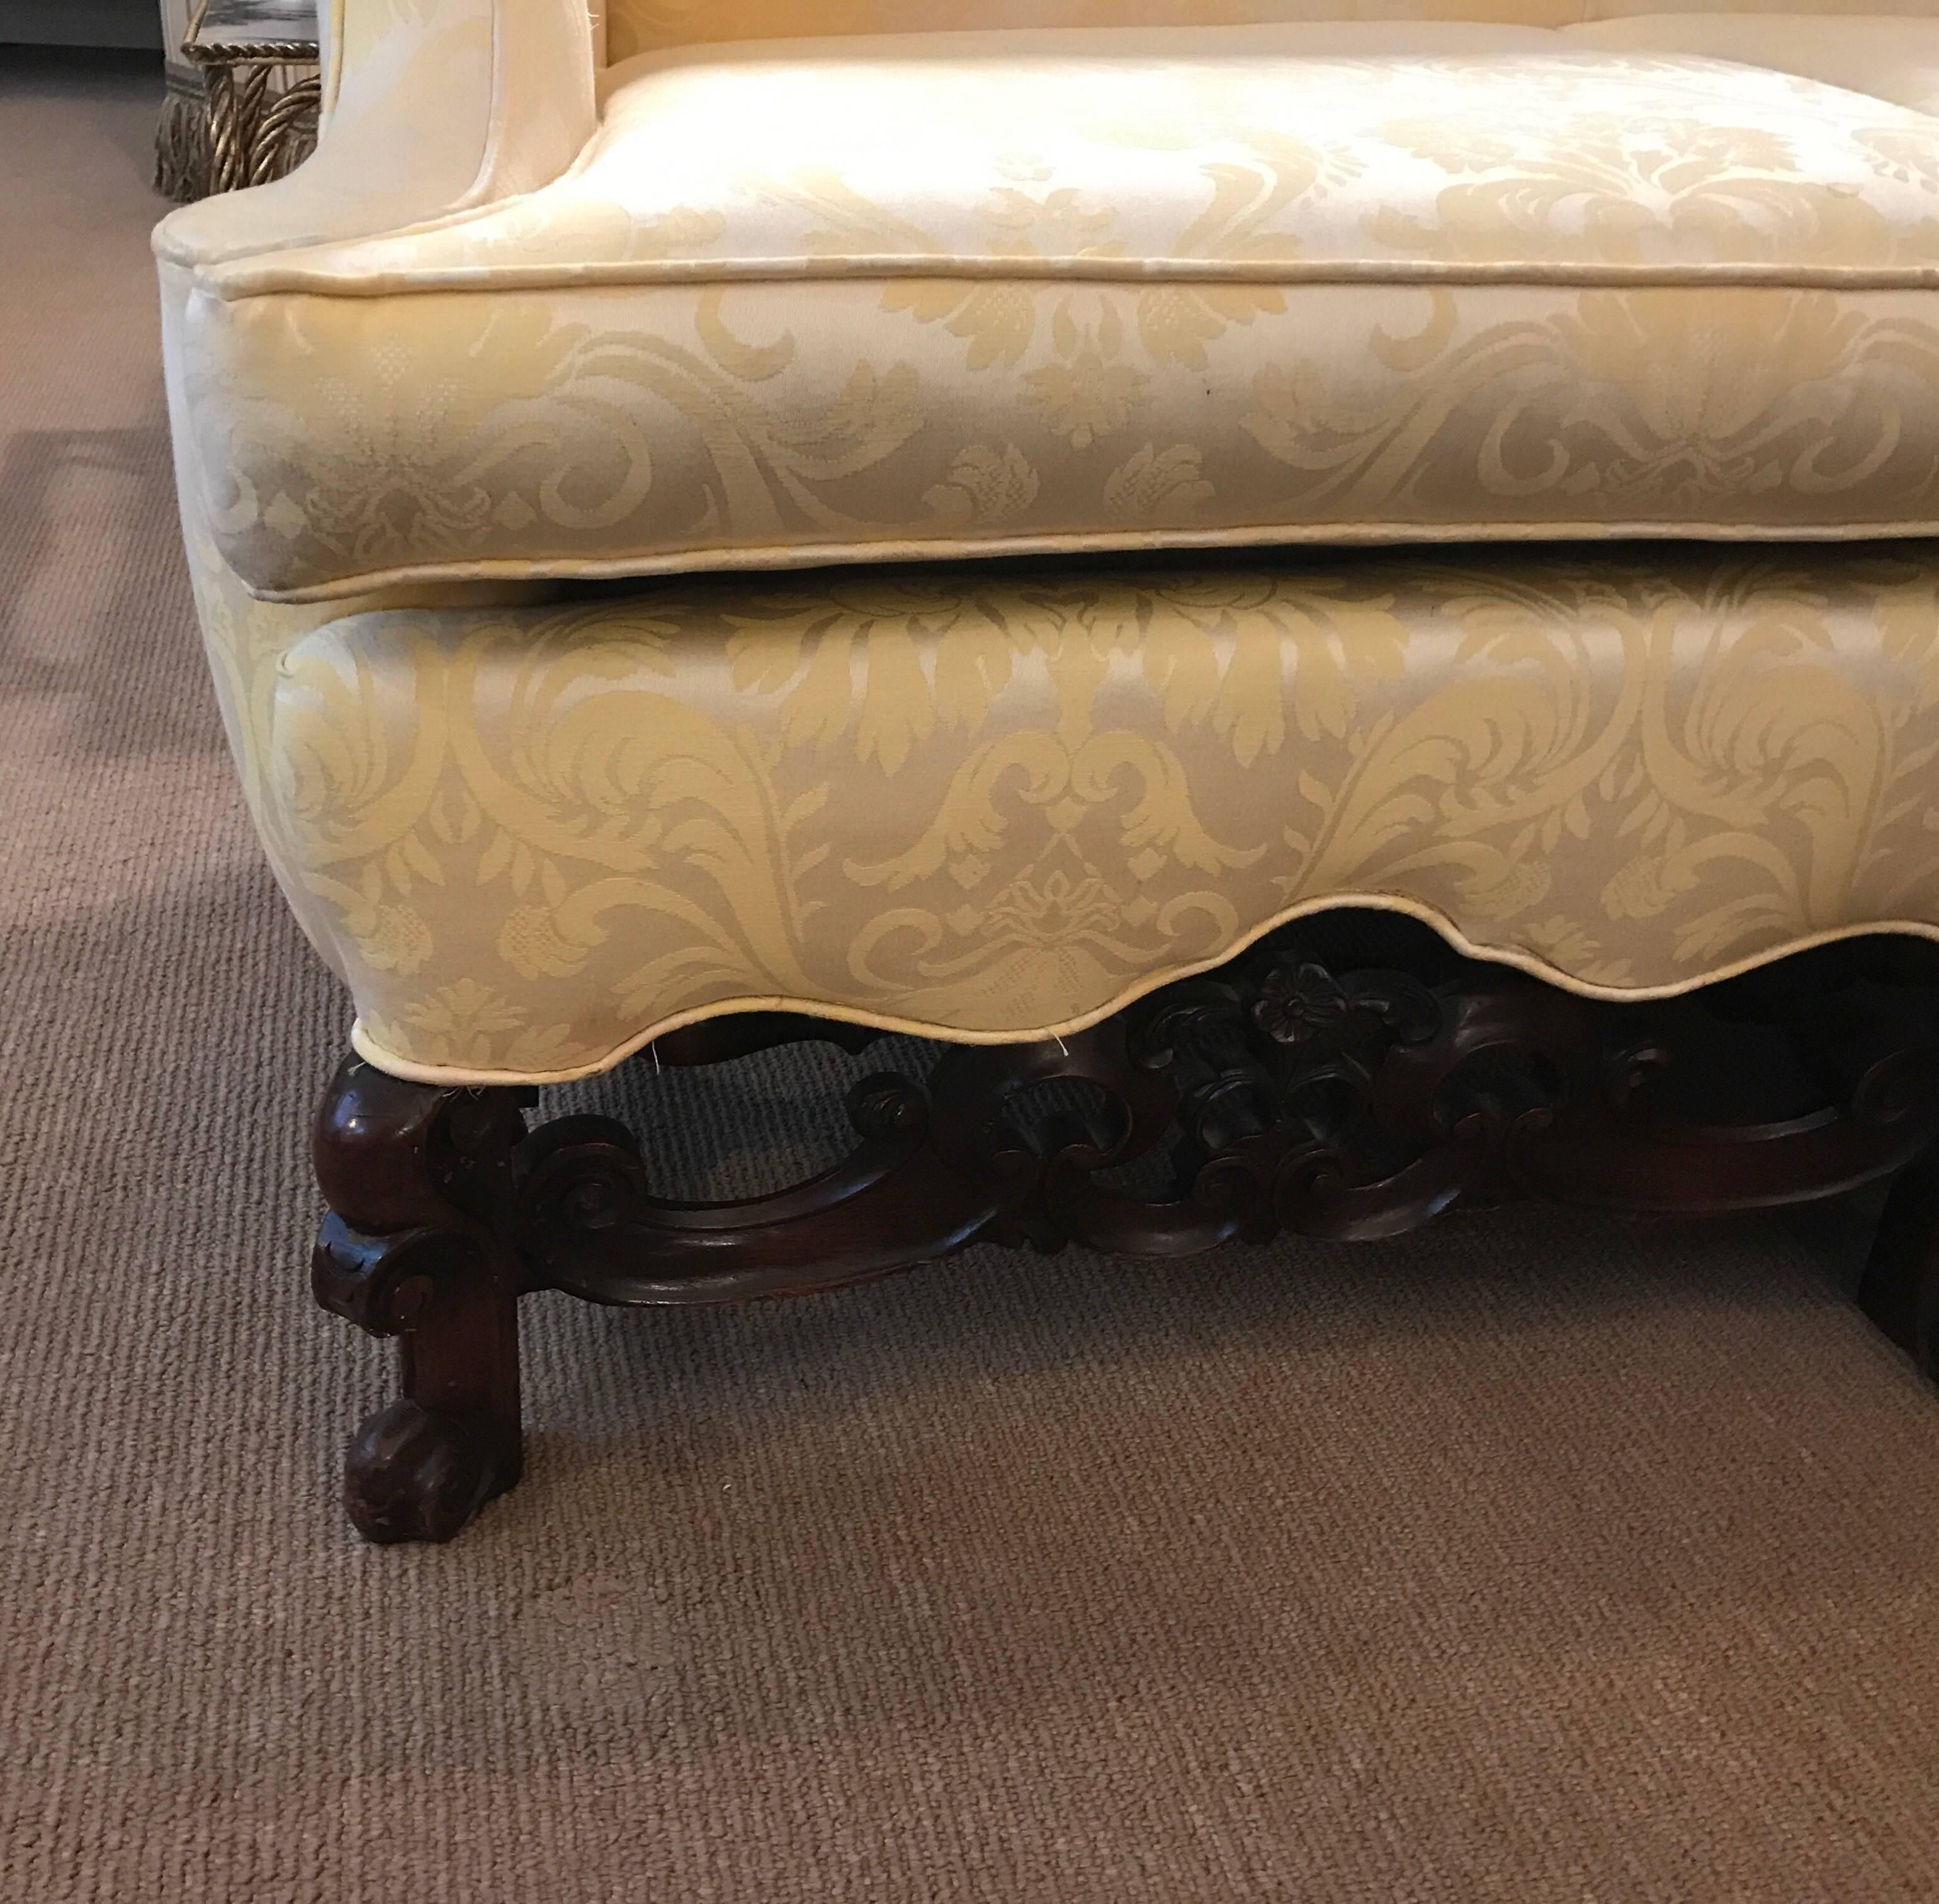 Stately antique tight back sofa with hand-carved walnut base. The clean back with shapely arms and a scalloped apron resting on carved English Jacobean style legs with stretchers. This sofa is a great apartment size, 78 inches long. The springs are